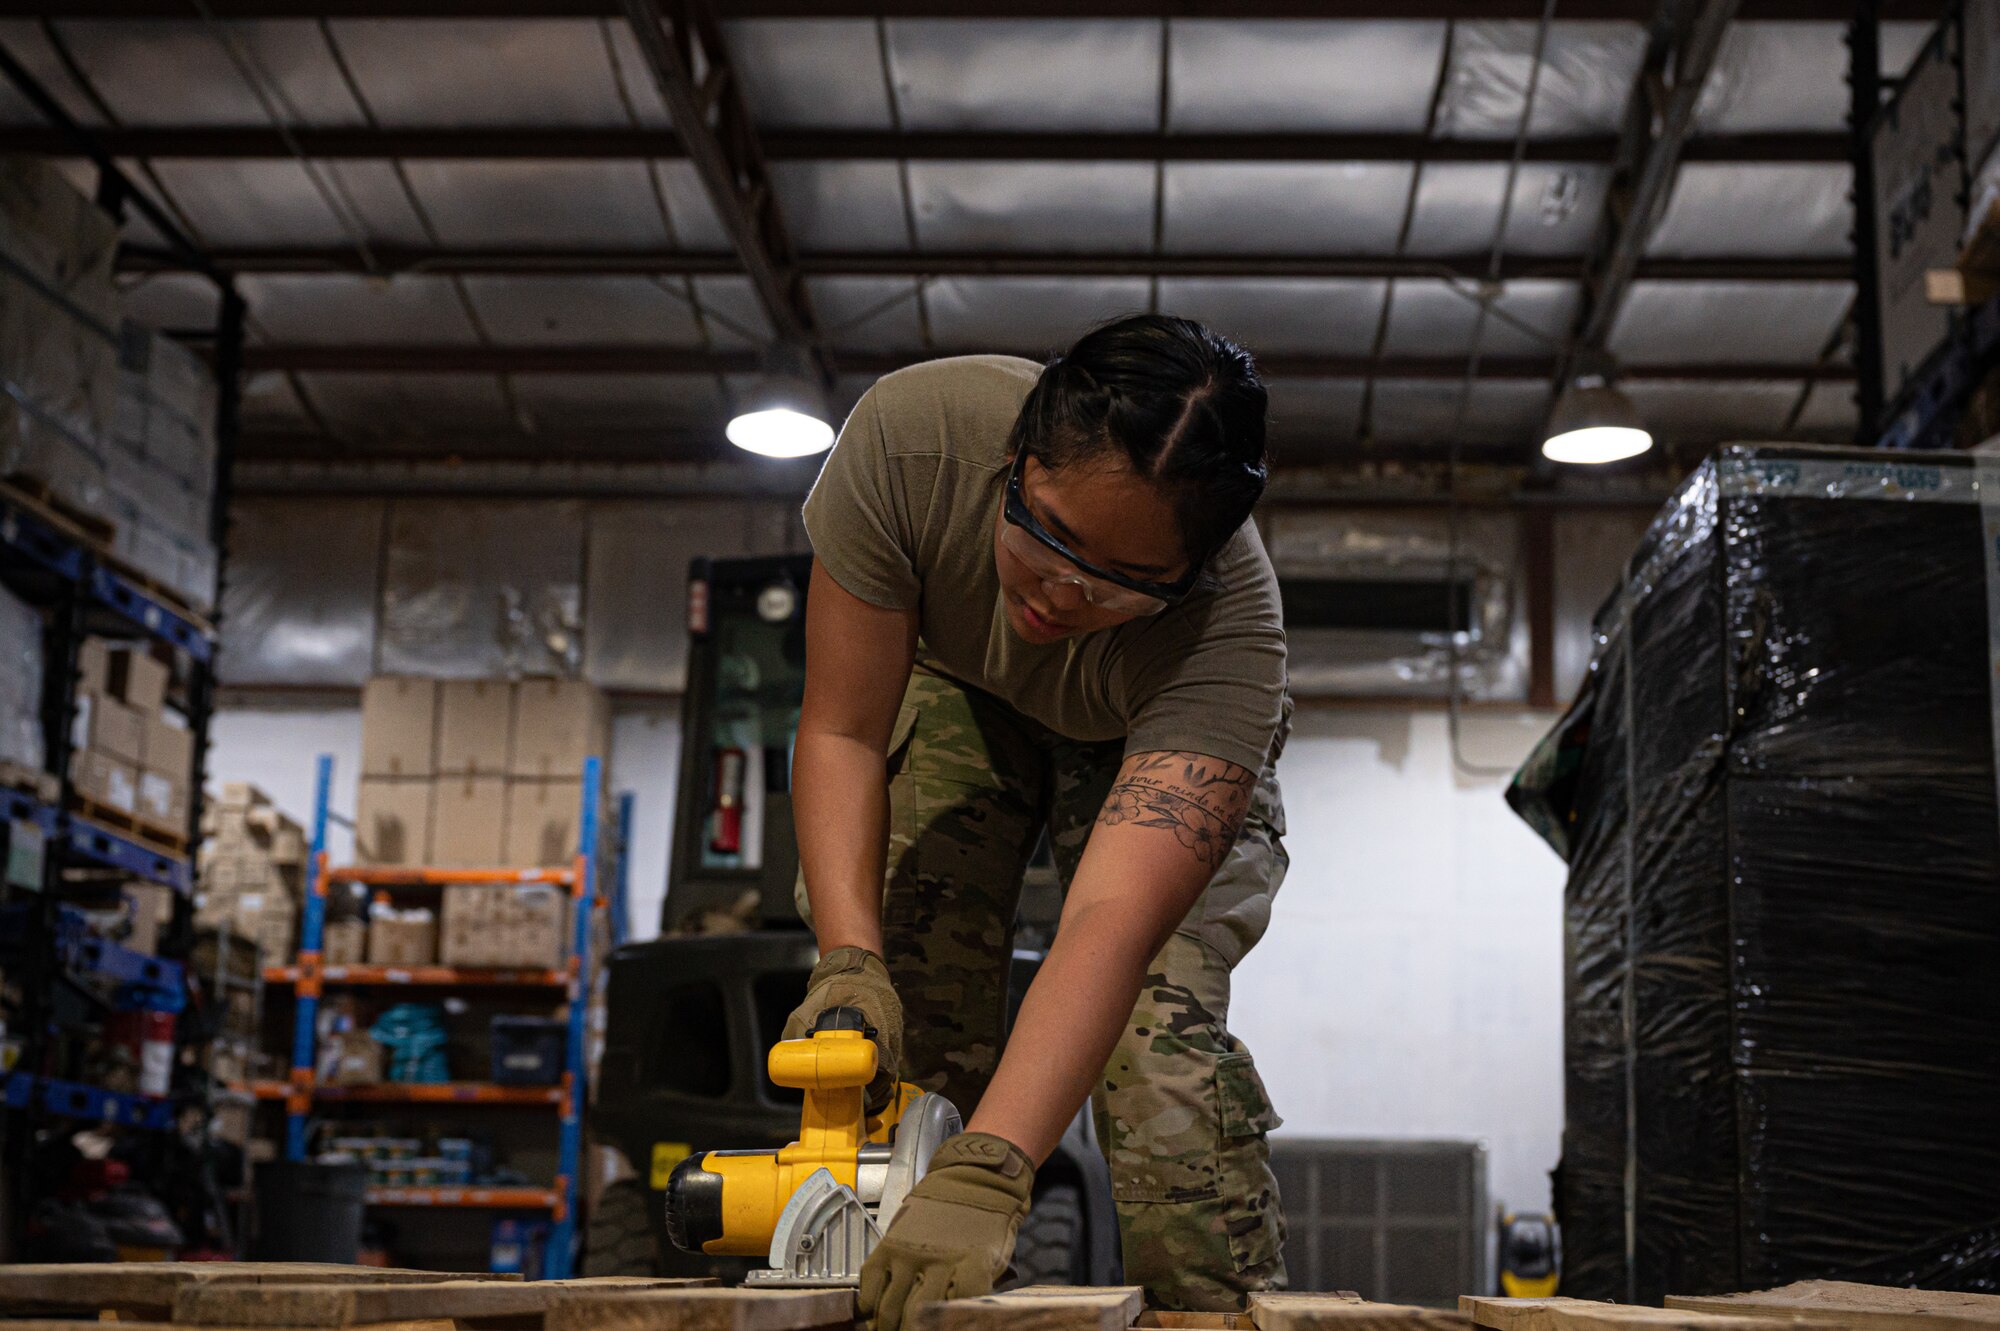 Project Salvage Pallets is a new upcycle program at Ali Al Salem Air Base that allows service members to use salvaged wooden pallets to create furniture for airmen dorms and common areas.